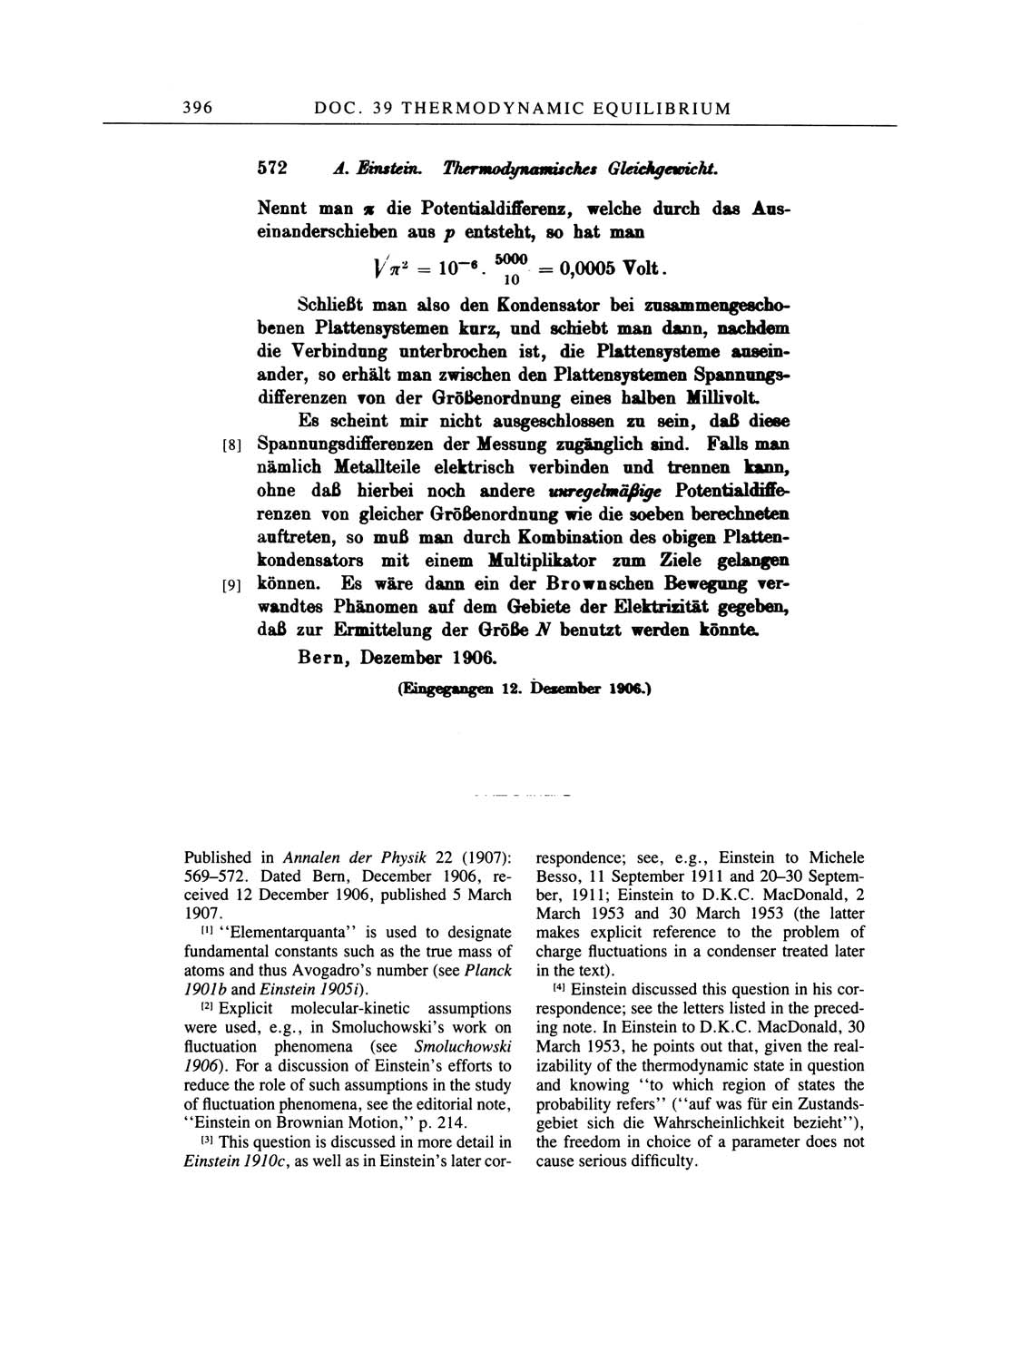 Volume 2: The Swiss Years: Writings, 1900-1909 page 396